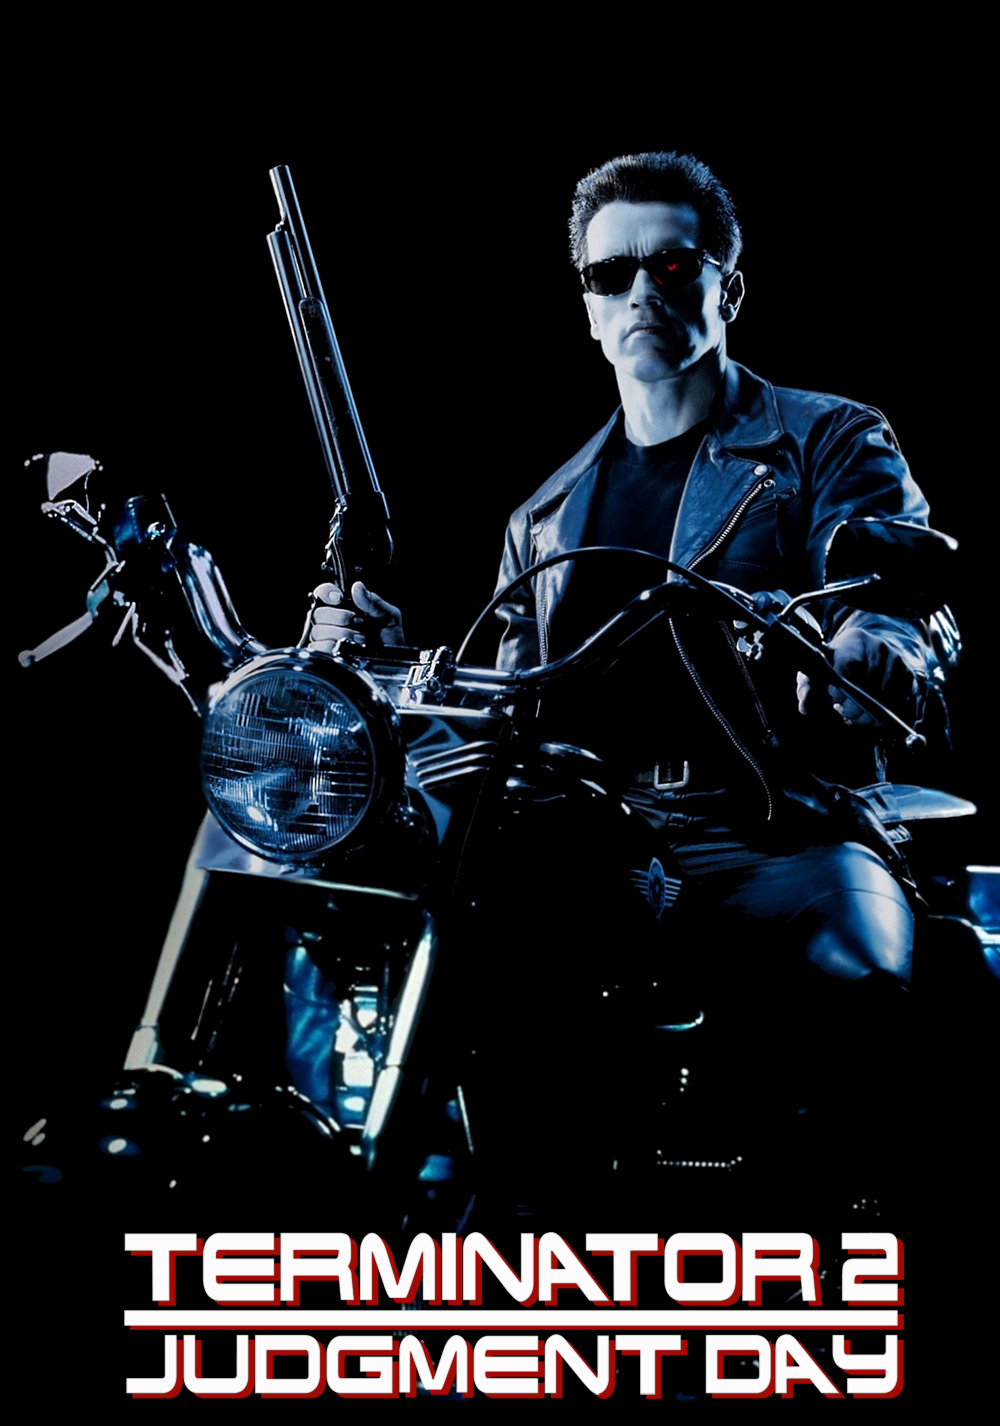 Terminator 2: Judgment Day Backgrounds, Compatible - PC, Mobile, Gadgets| 1000x1426 px